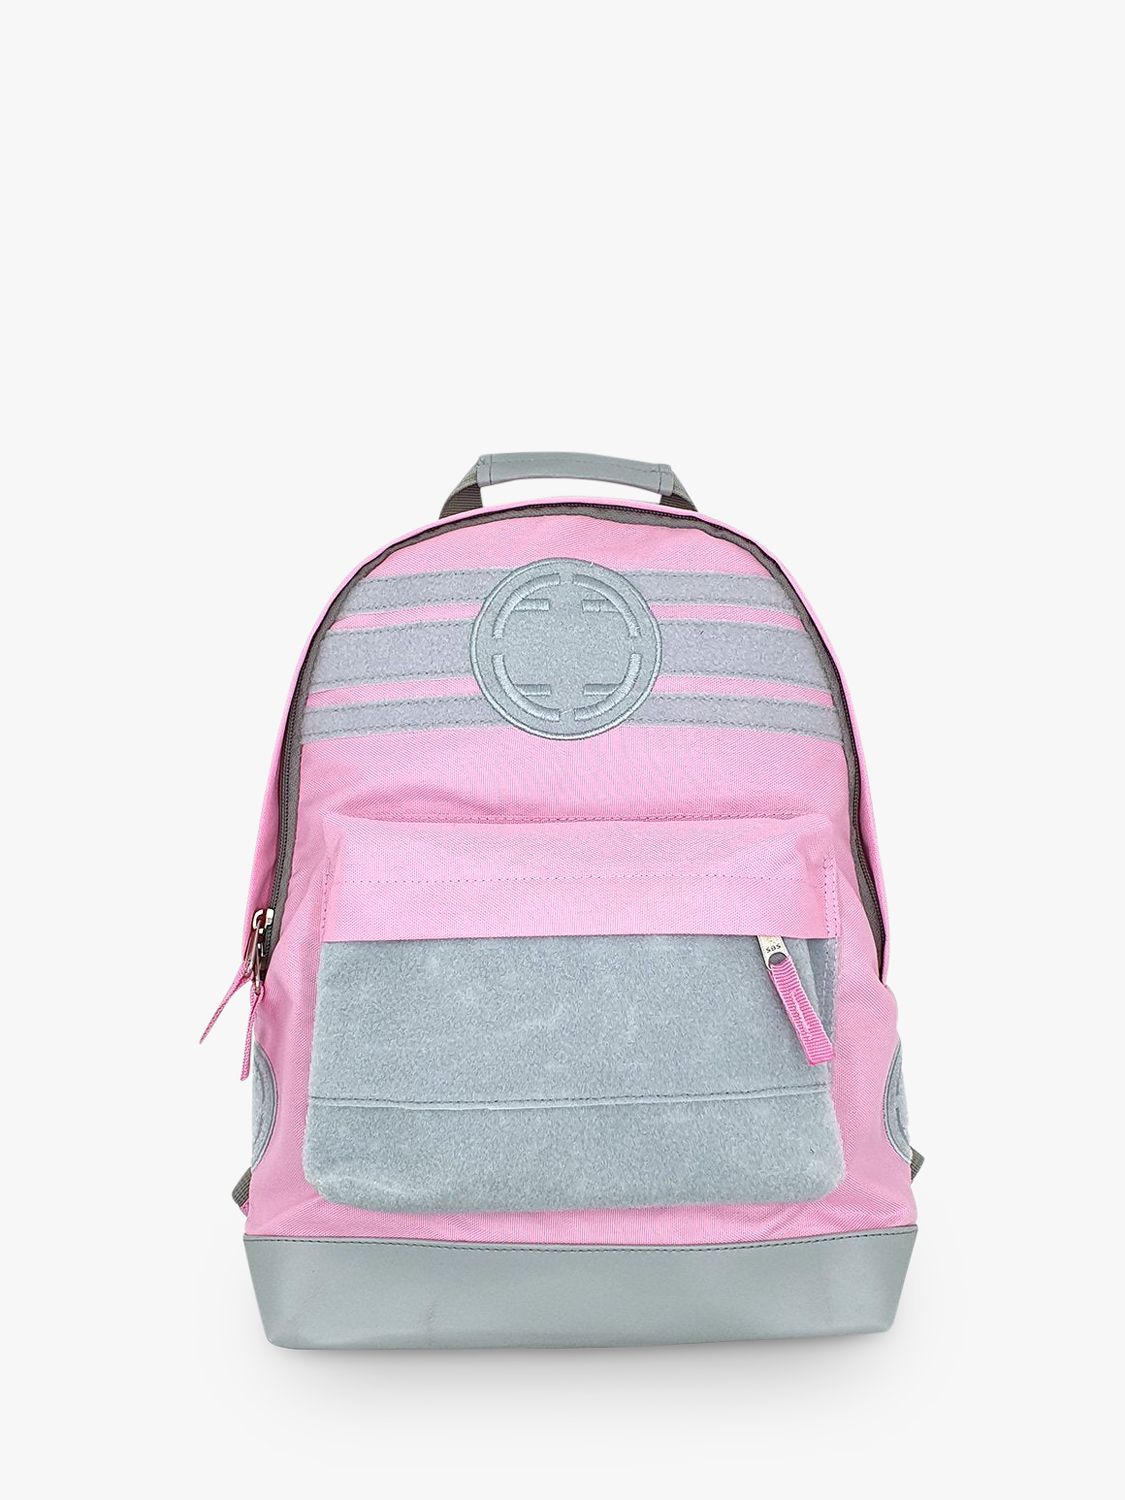 Fabric Flavours Kids' Plain Backpack, Pink/Grey at John Lewis & Partners